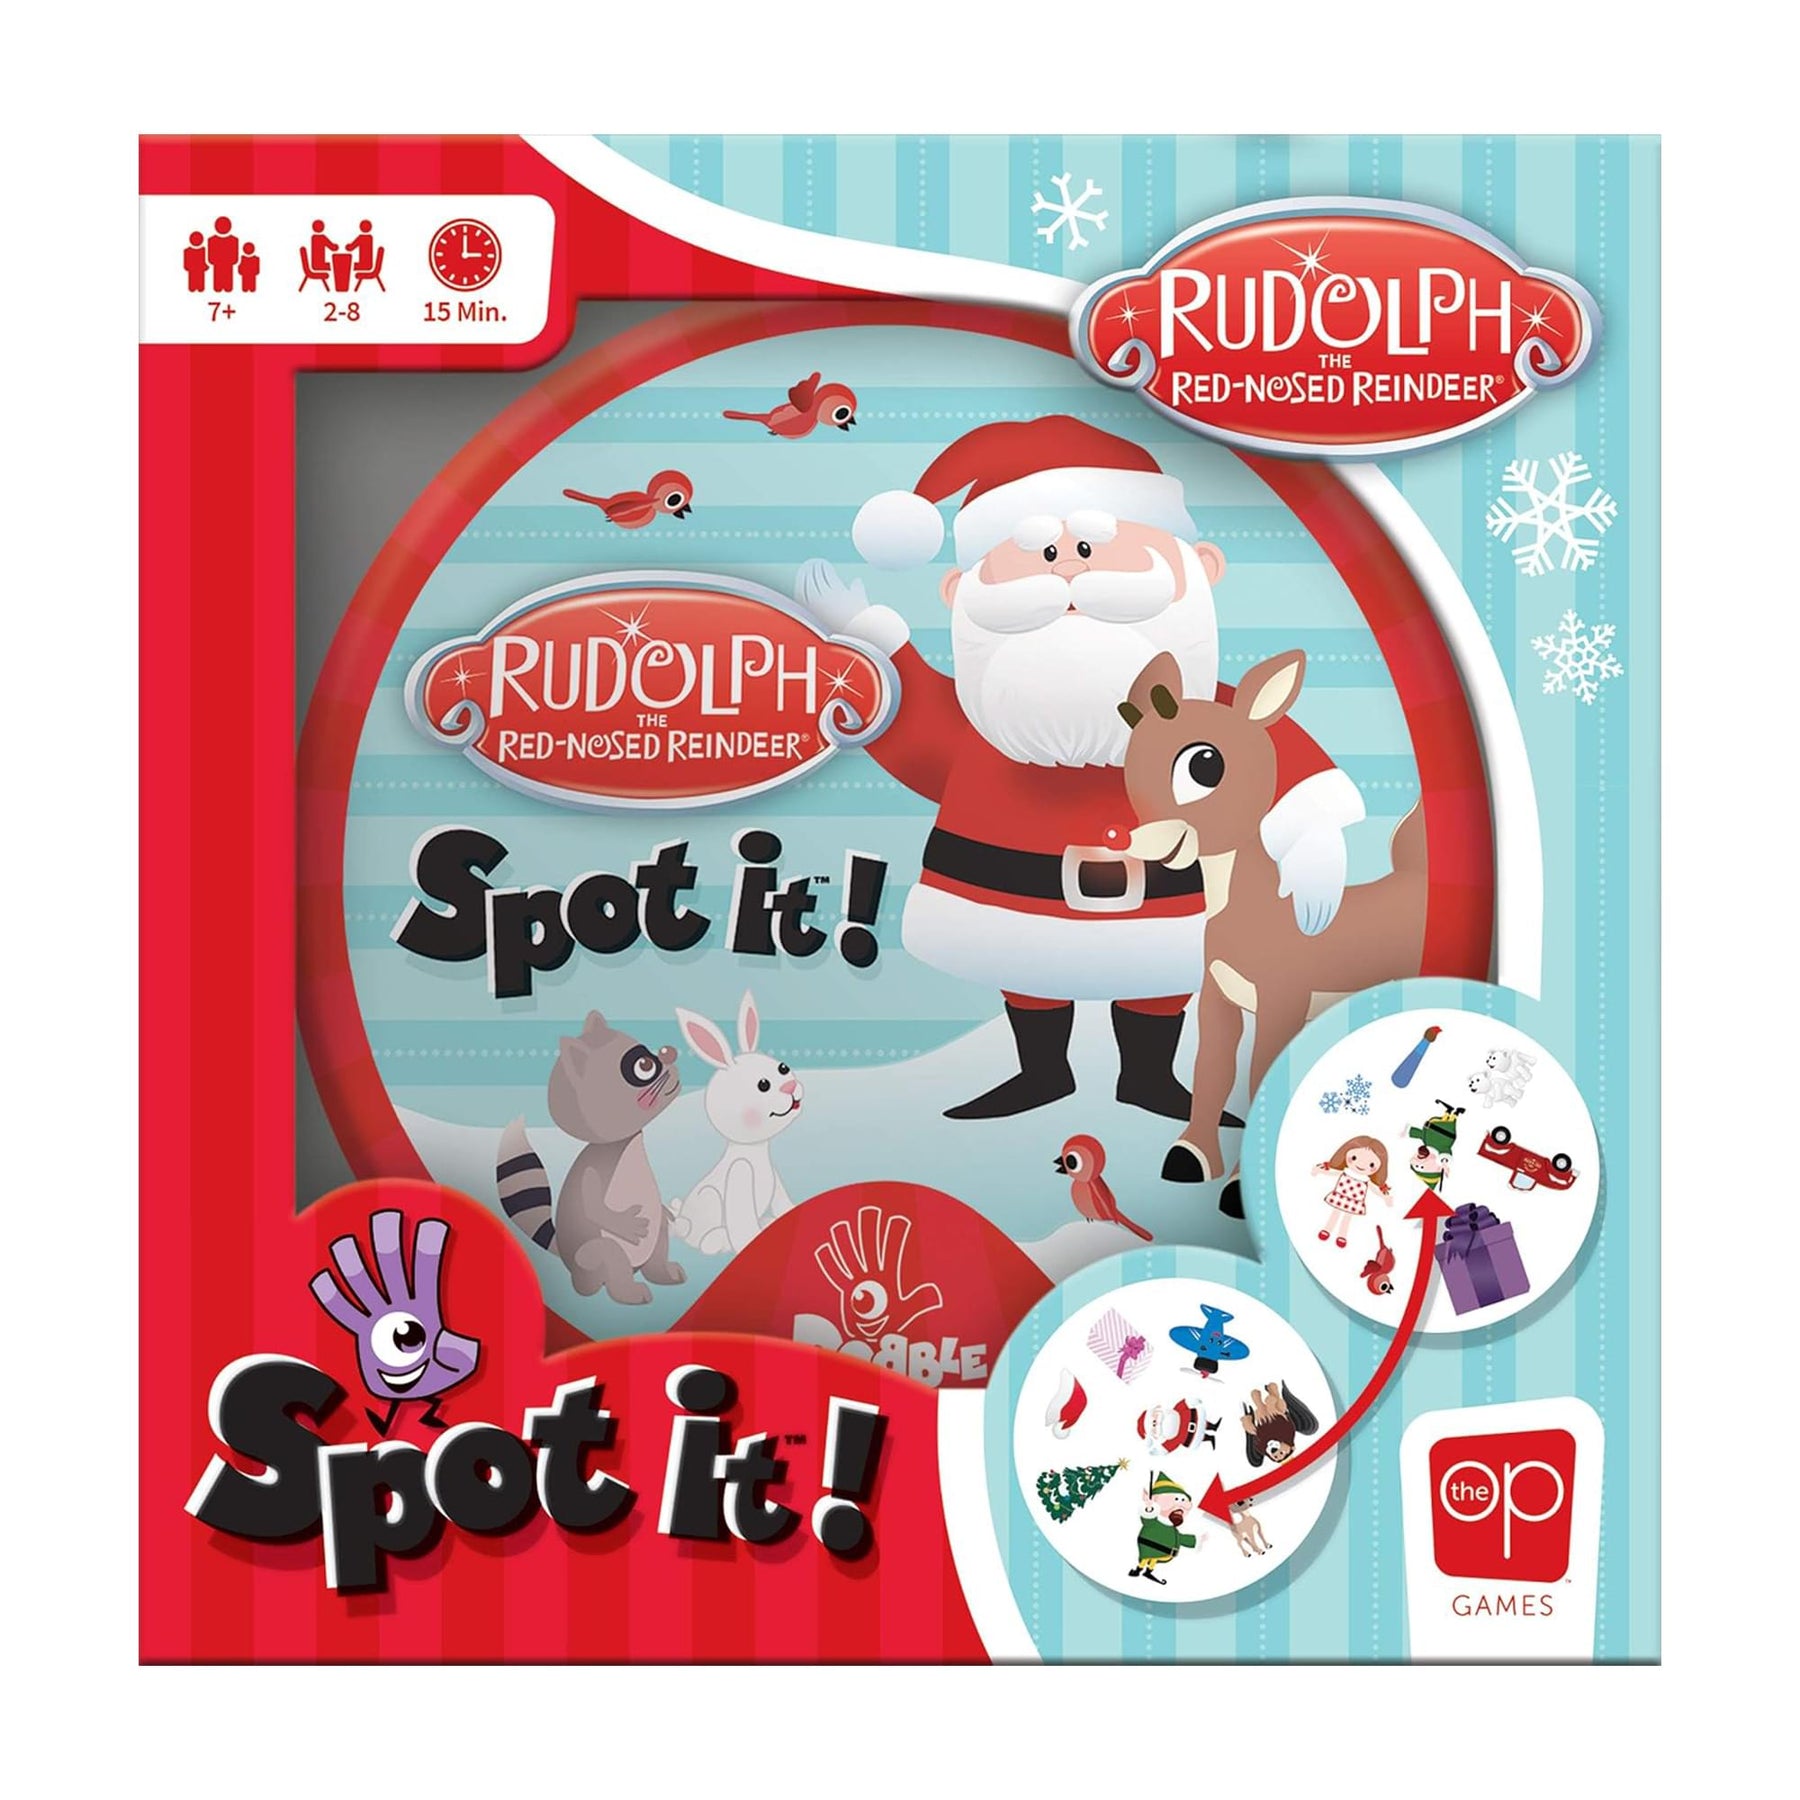 Rudolph The Red-Nosed Reindeer Spot It! Card Game